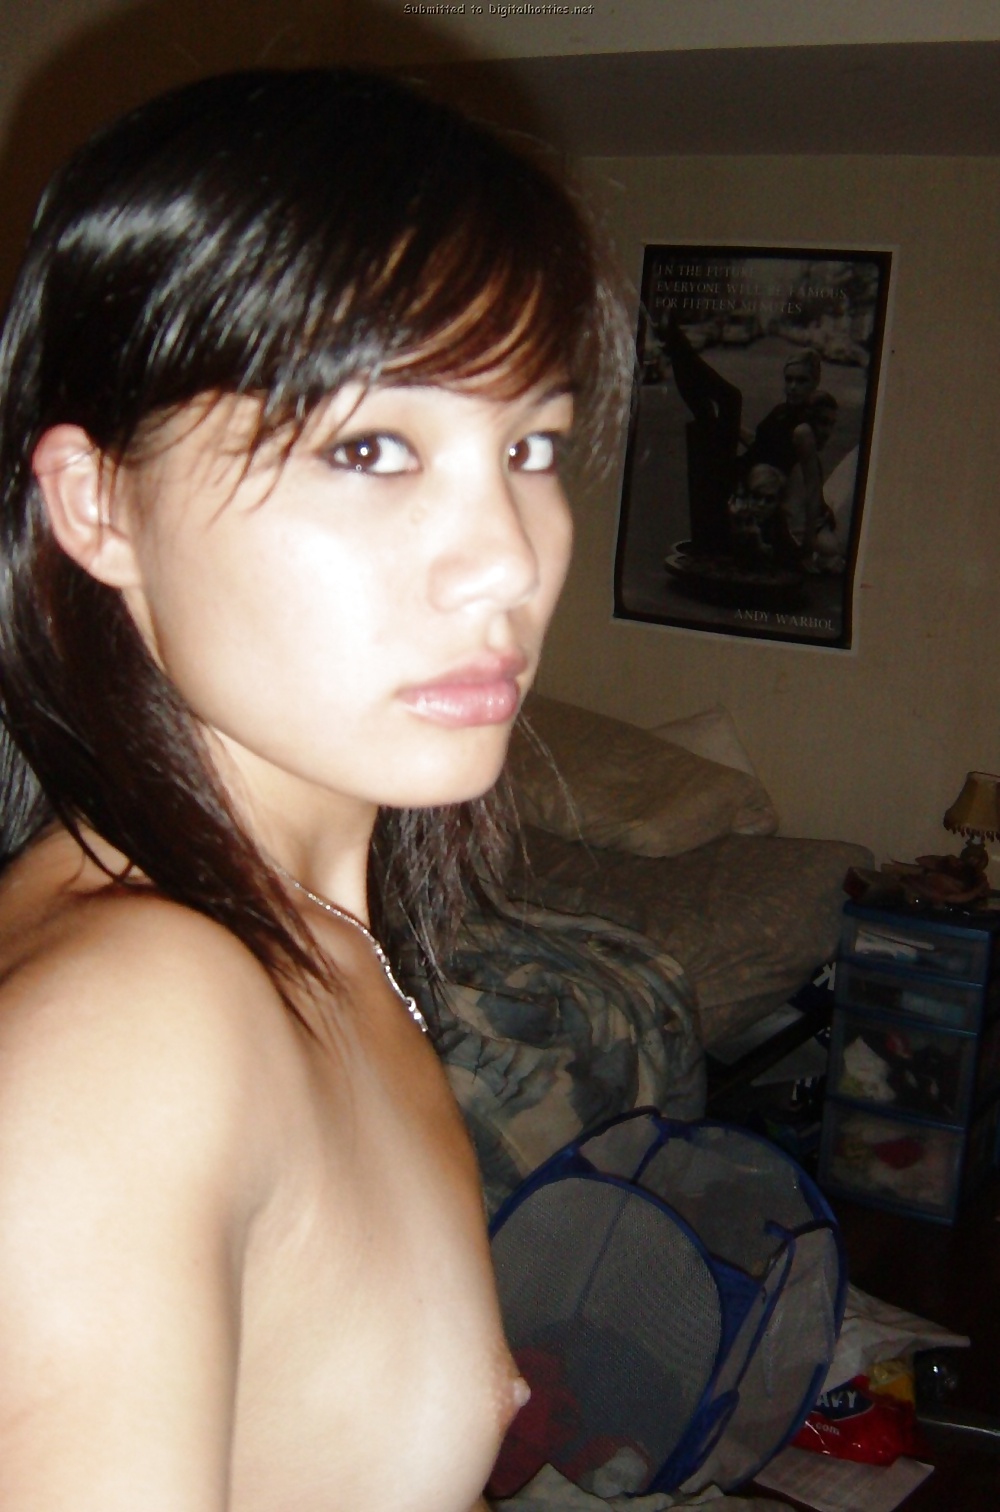 Teen Lusy and Tits adult photos